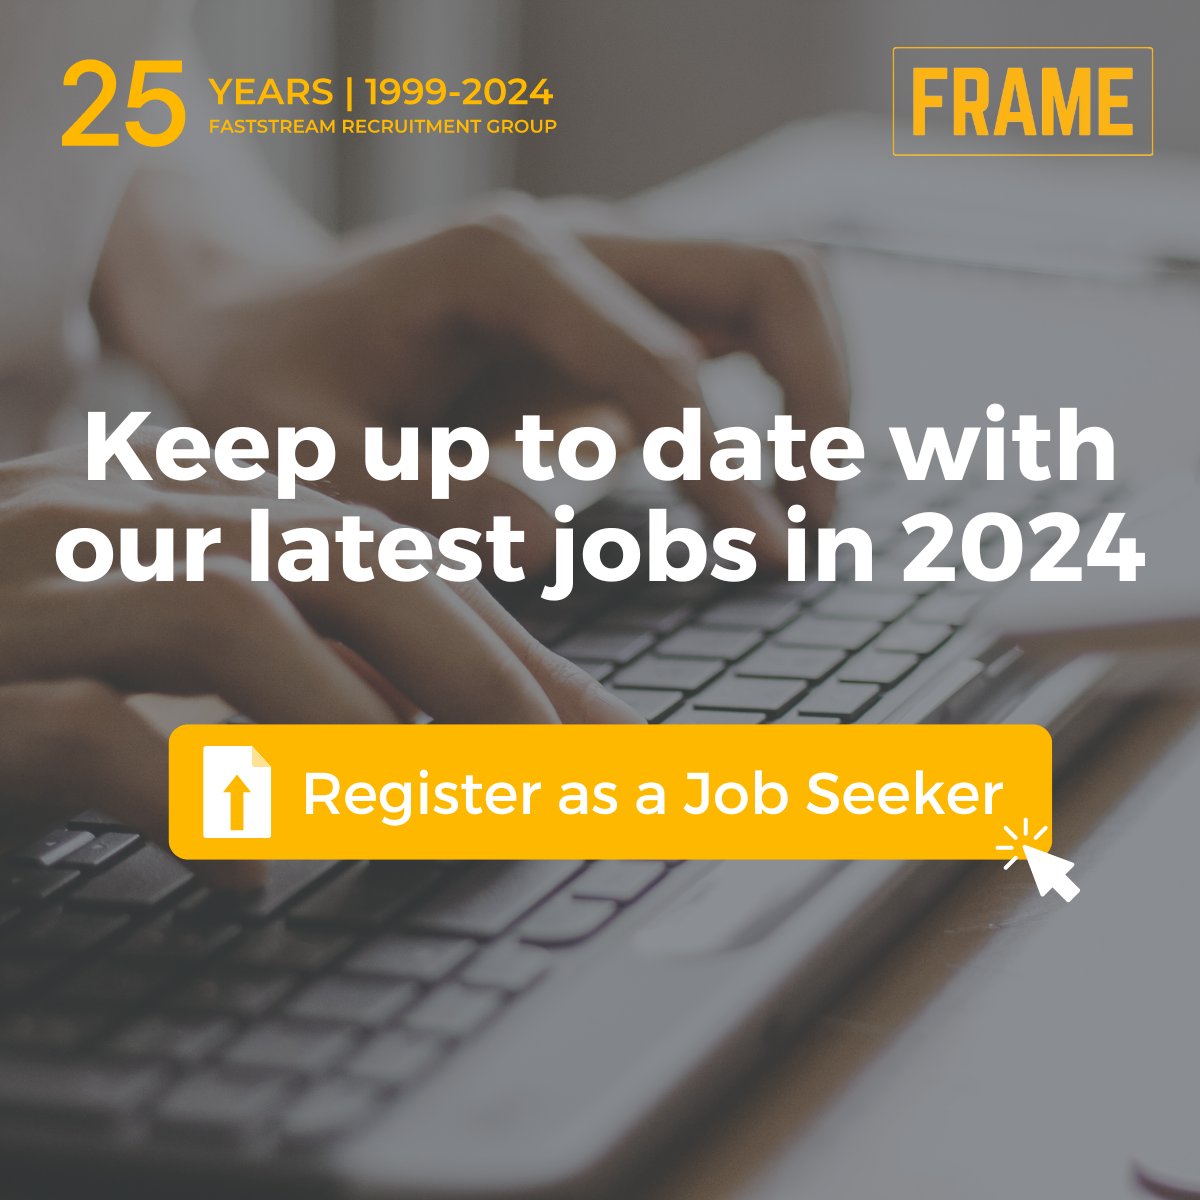 Don't miss out on the freshest opportunities. Dive into FRAME Recruitment - your gateway to the hottest jobs, exclusive insights, and industry buzz. Sign up now: frame-recruitment.com/users/register… #architecture #interiordesign #FRAME25 #FaststreamGroup25